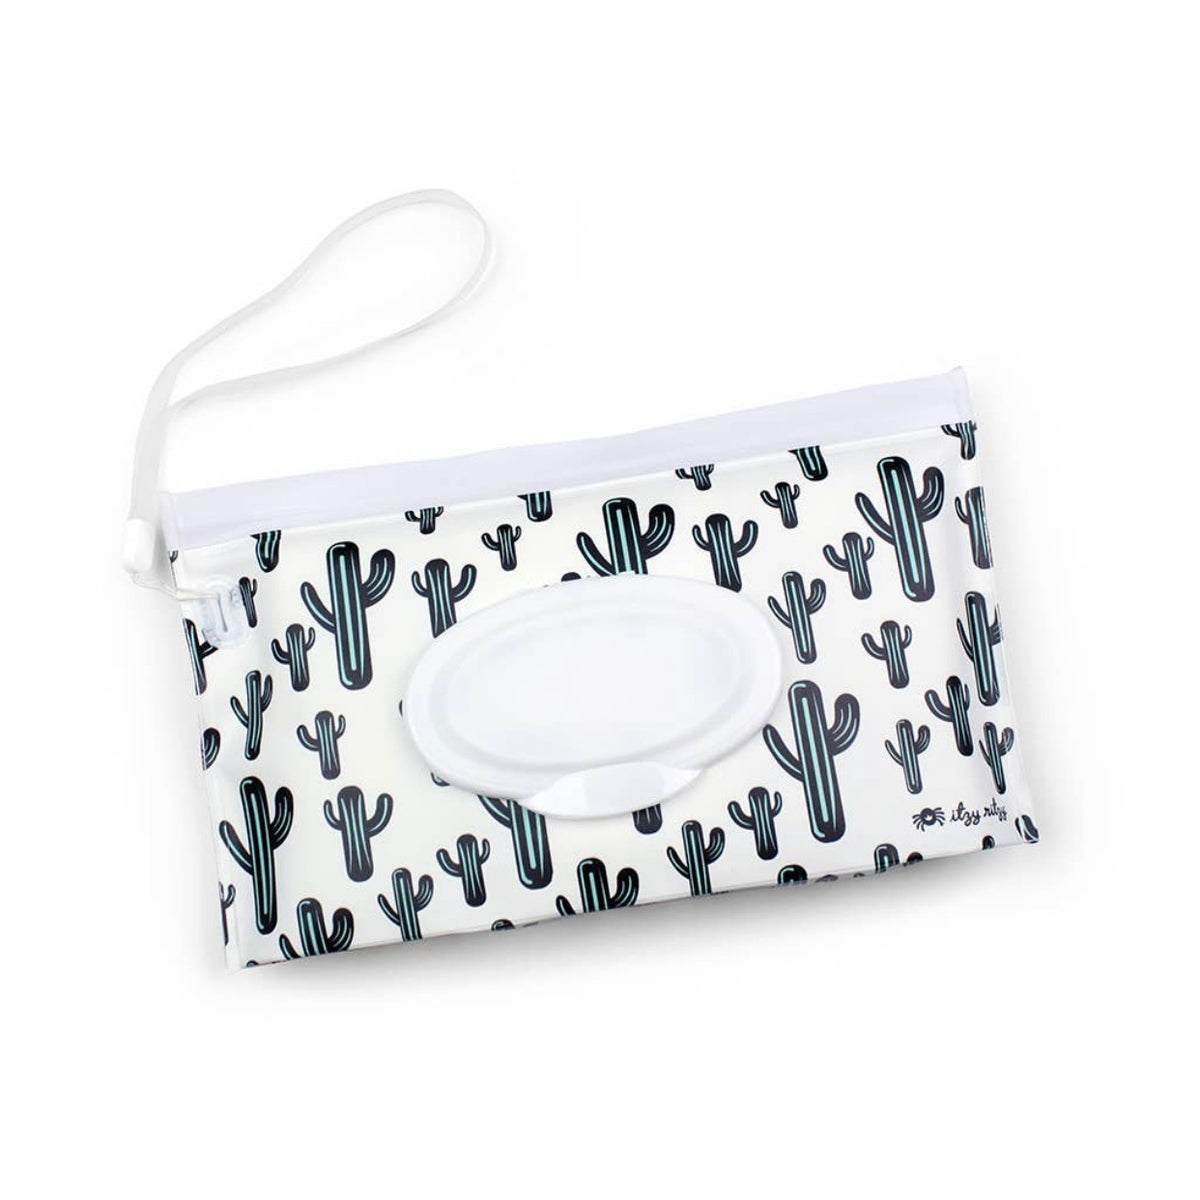 TAKE & TRAVEL POUCH REUSABLE WIPES CASE